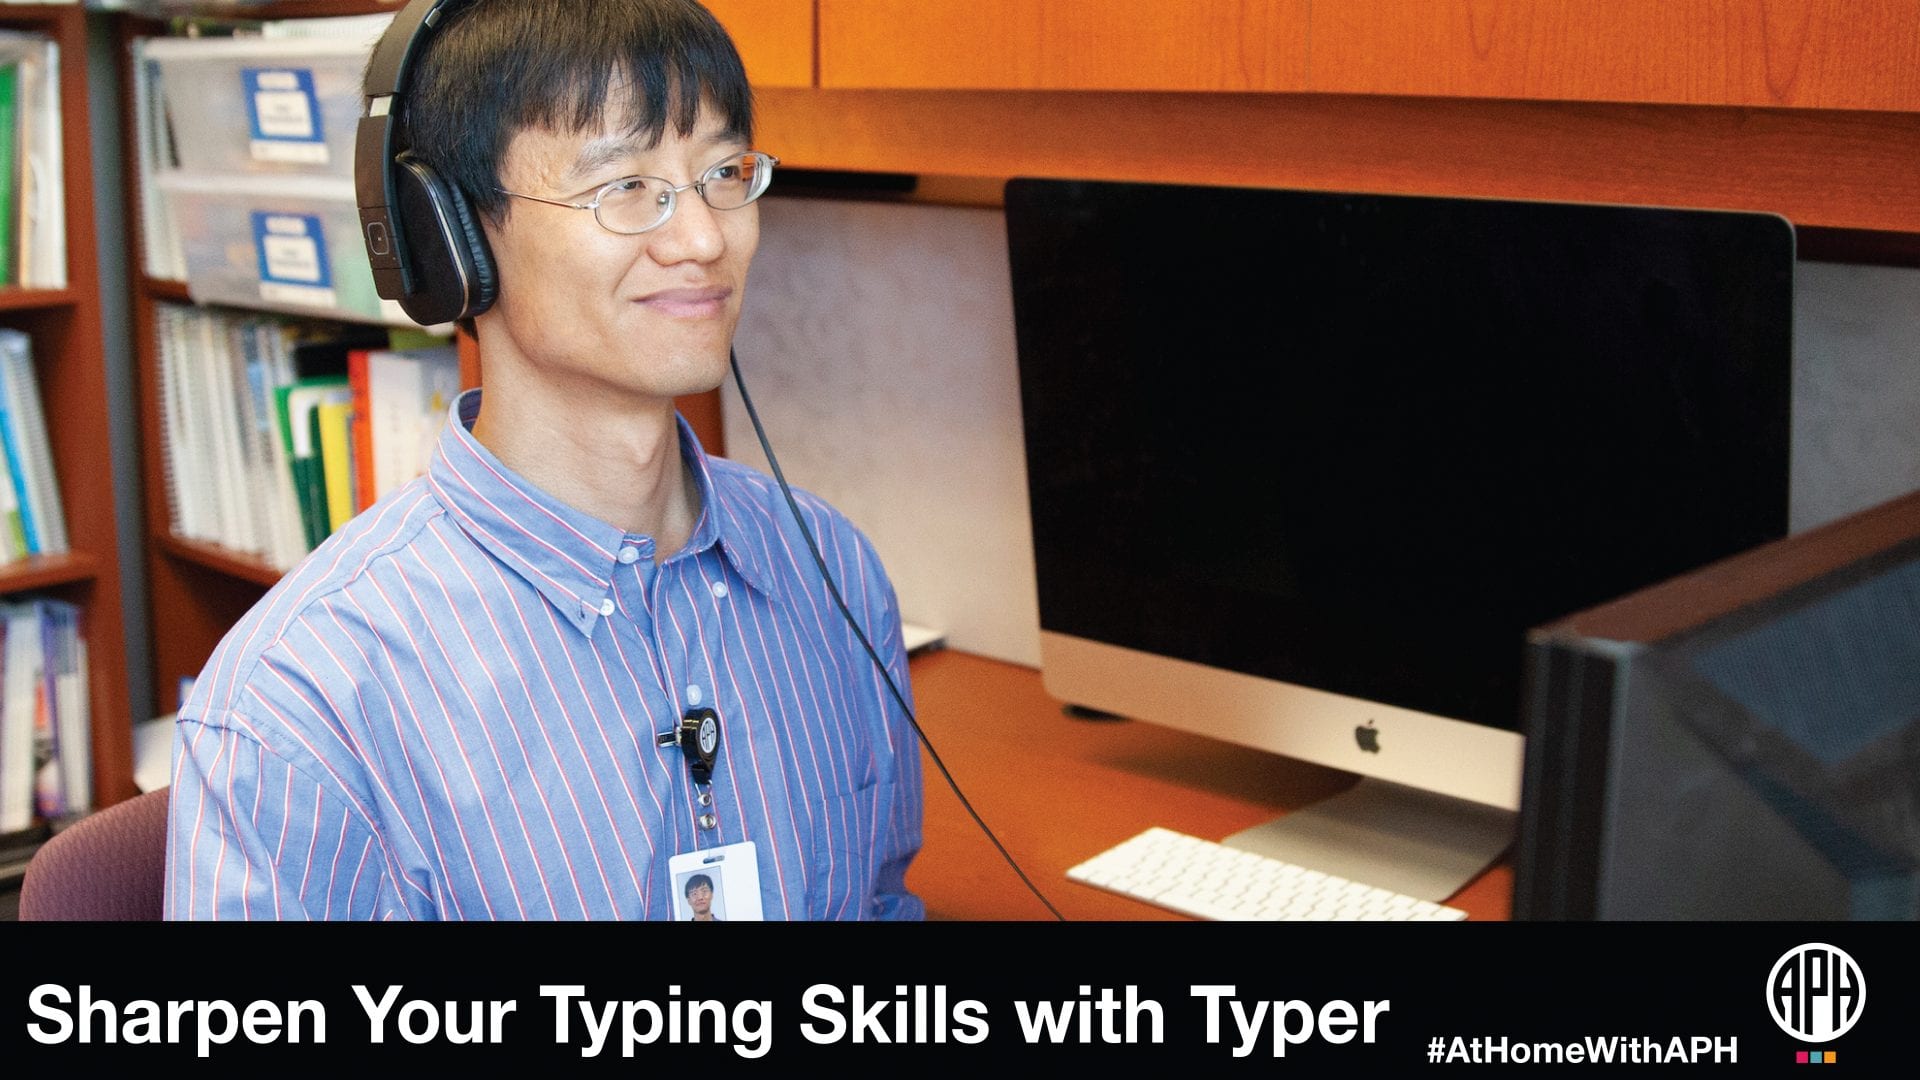 a man with glasses wearing headphones and sitting at a computer. text reads "Sharpen your typing skills with typer. #AtHomeWithAPH" APH logo